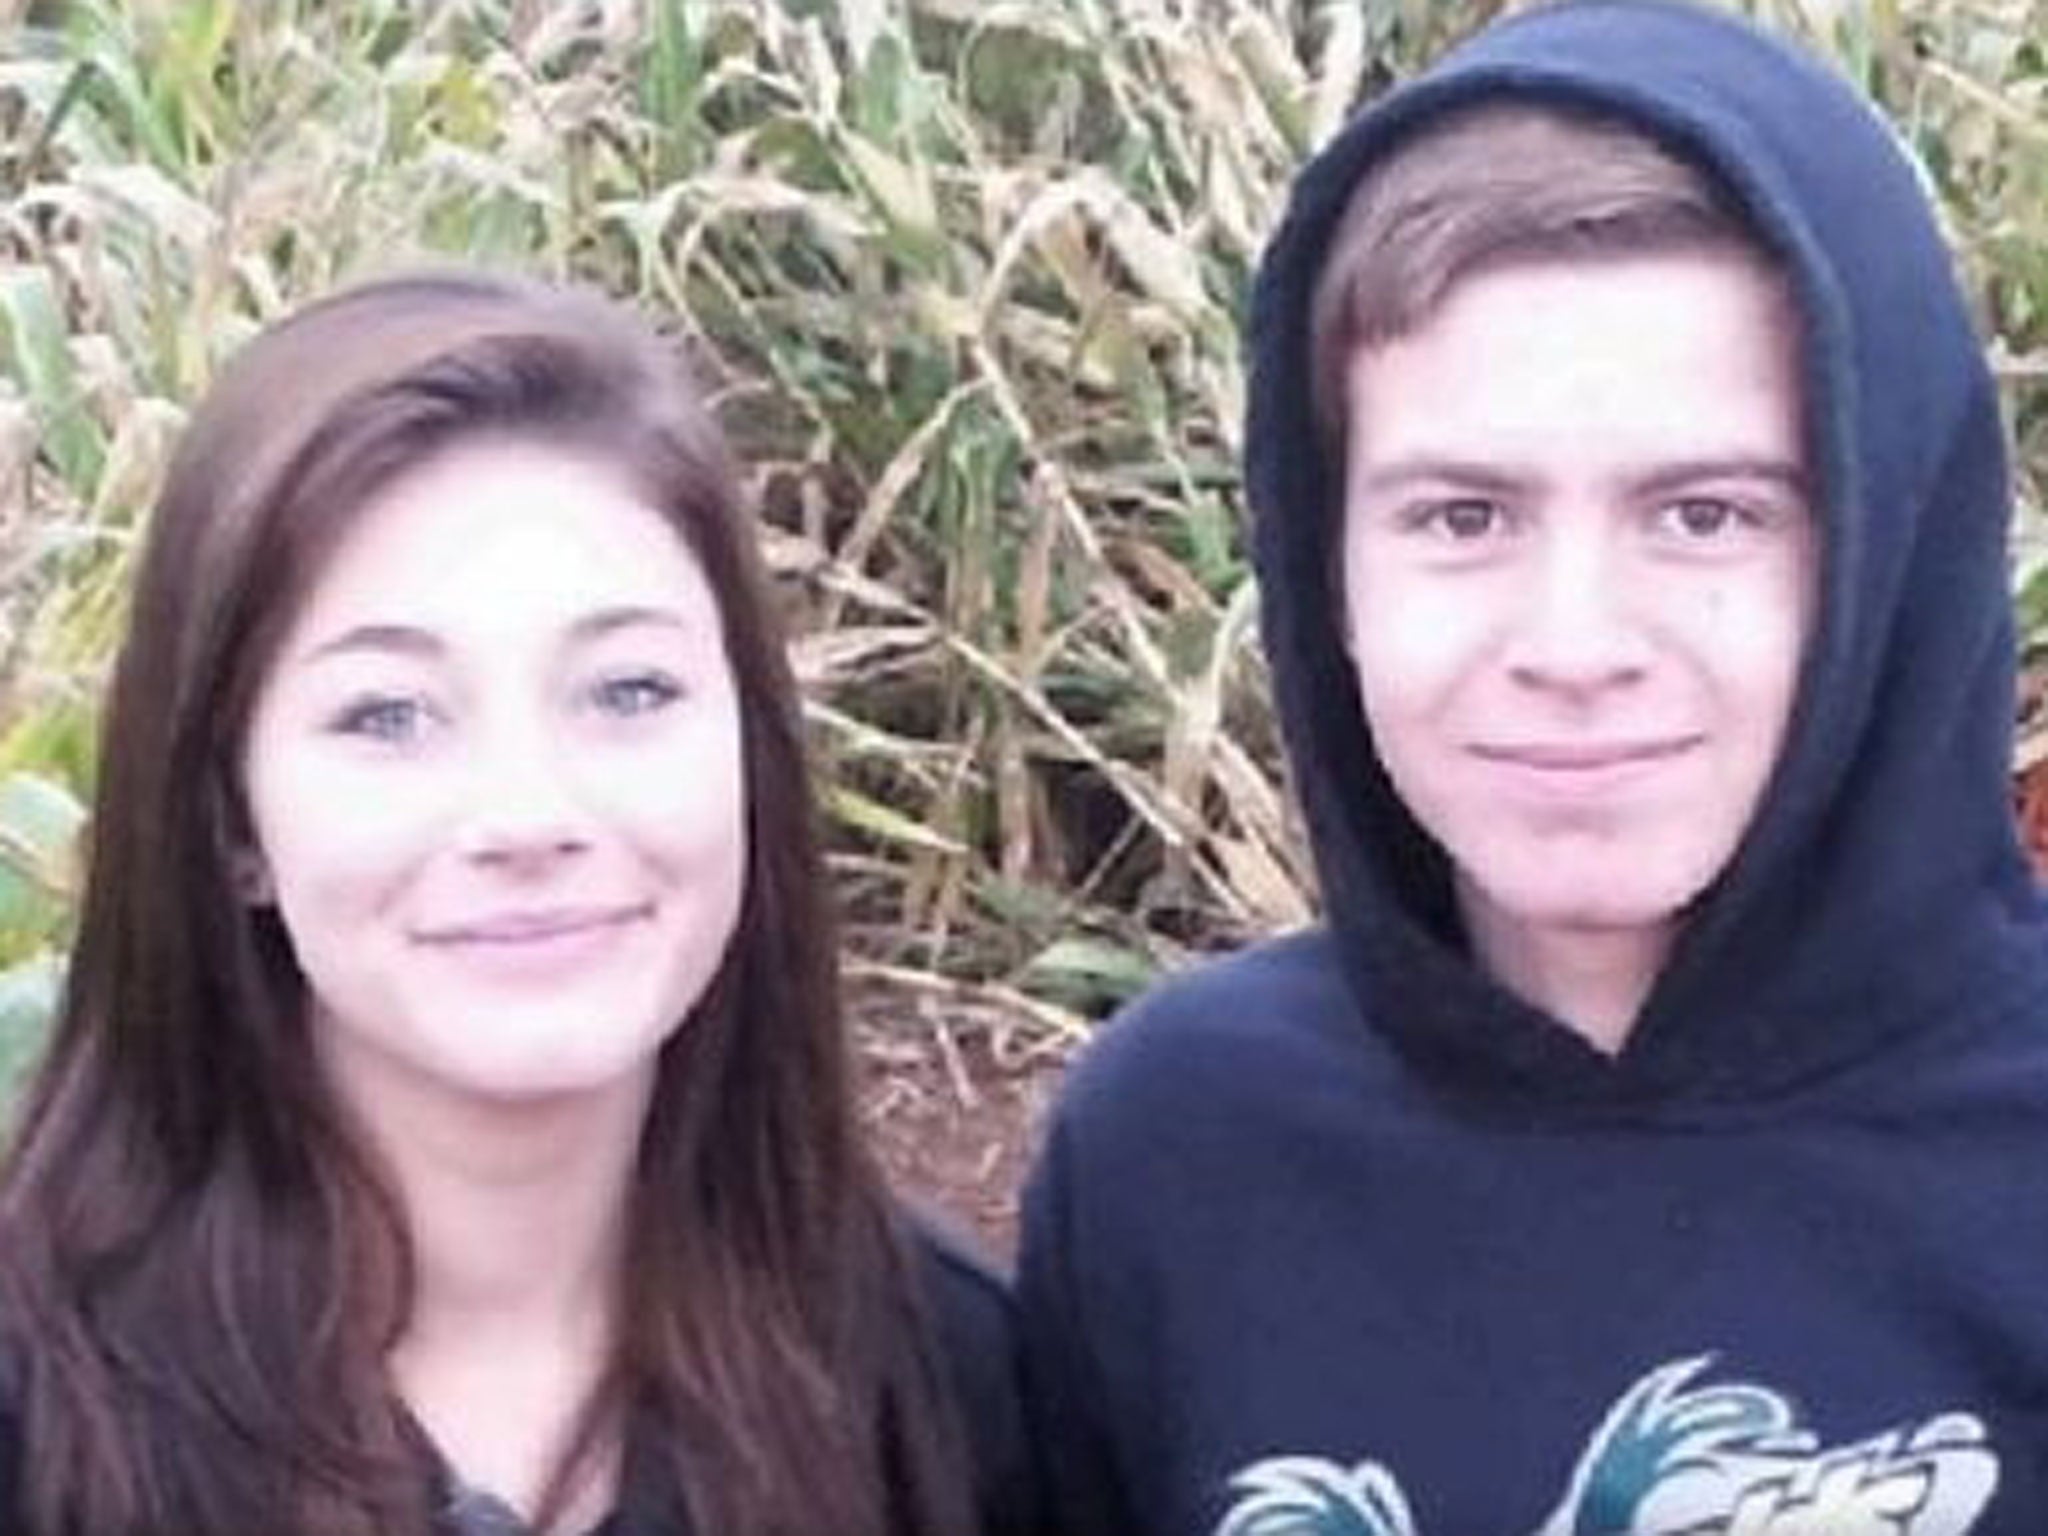 14-year-old Reynolds High School shooting victim Emilio Hoffman is pictured with his girlfriend Kaylah Ensign. A 15-year-old gunman who killed a student at an Oregon high school had an assault rifle, handgun and several magazines of ammunition hidden in a